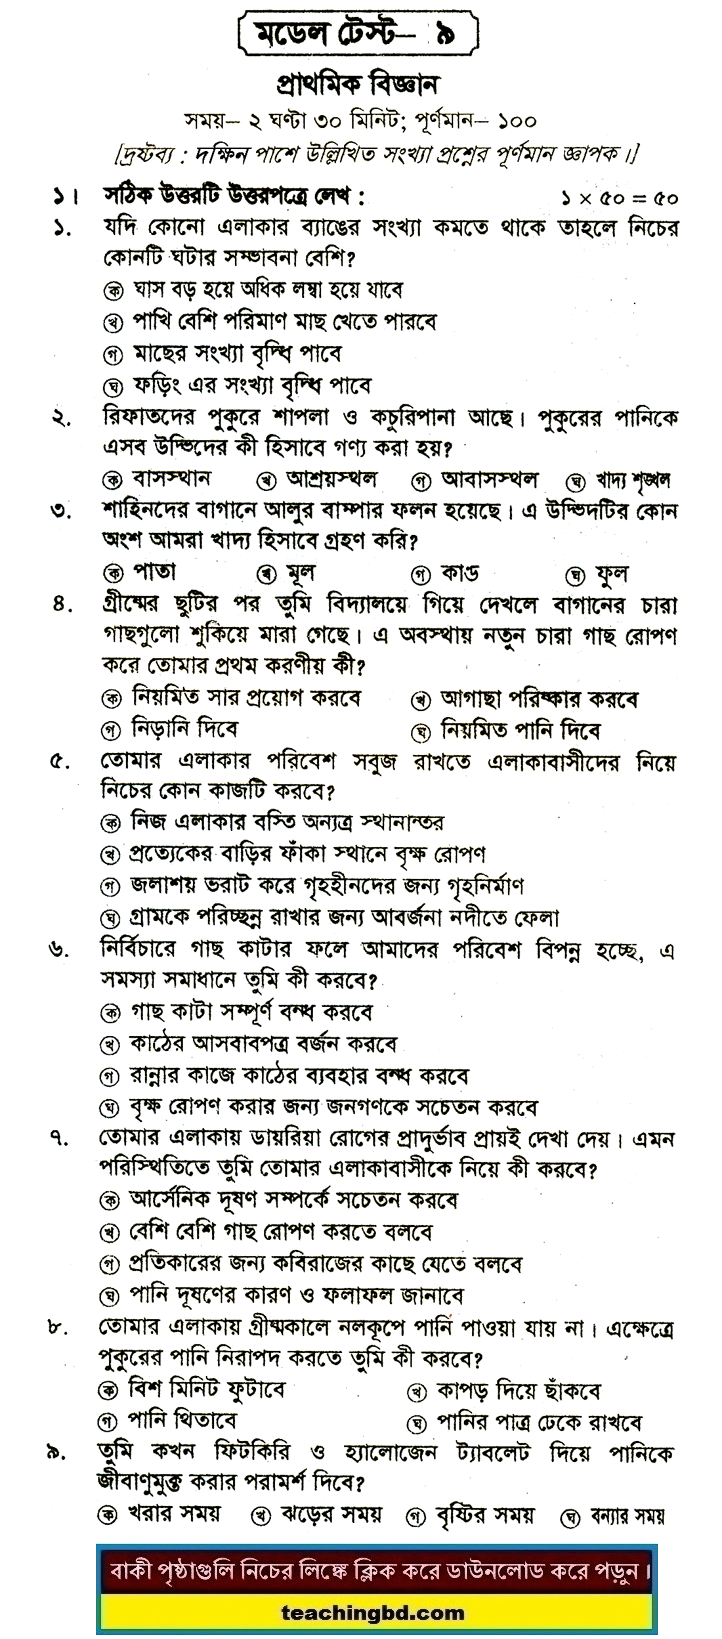 Elementary Science Suggestion and Question Patterns of PEC Examination 2016-9